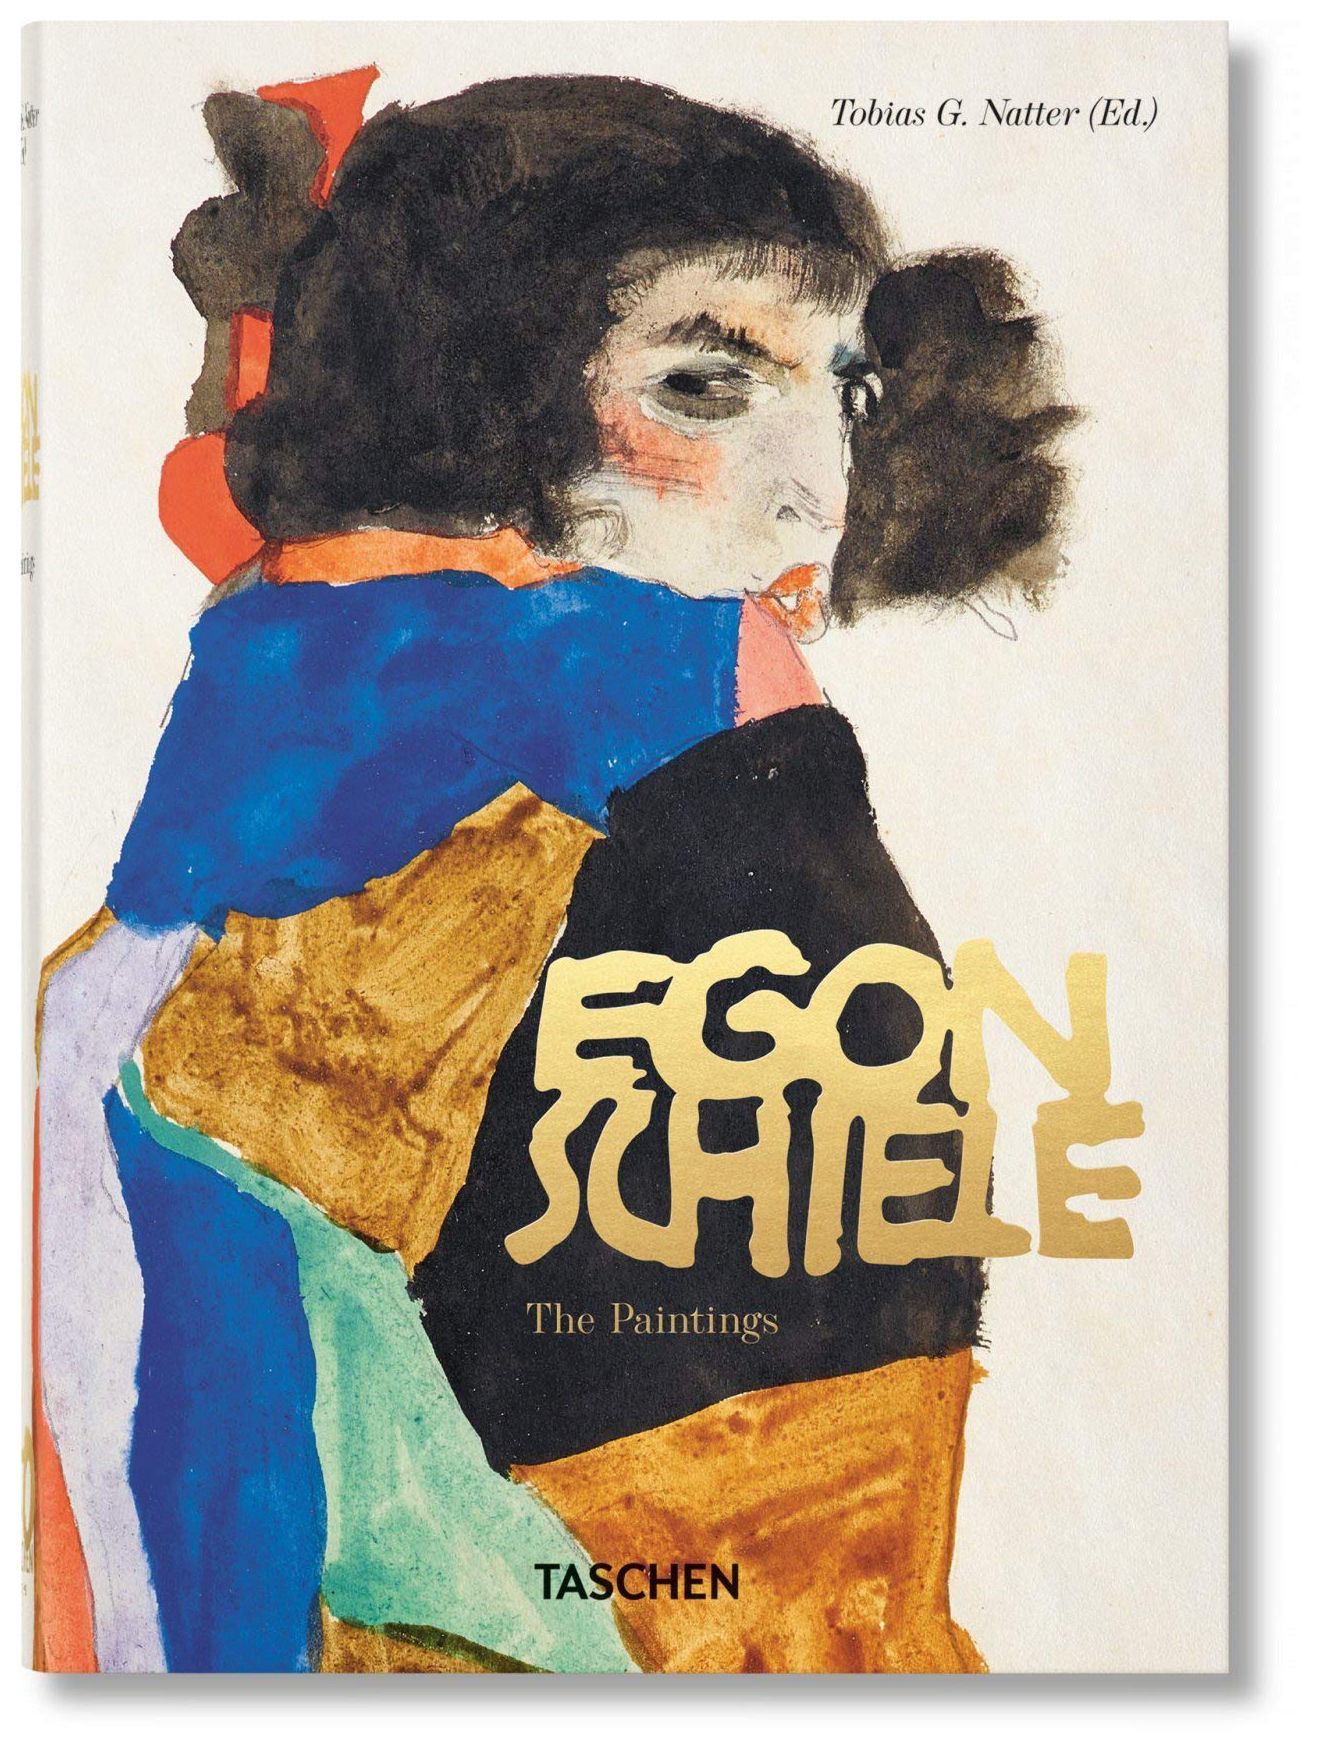 the adidas archive the footwear collection 40th anniversary edition Egon Schiele. The Paintings (40th Anniversary Edition)